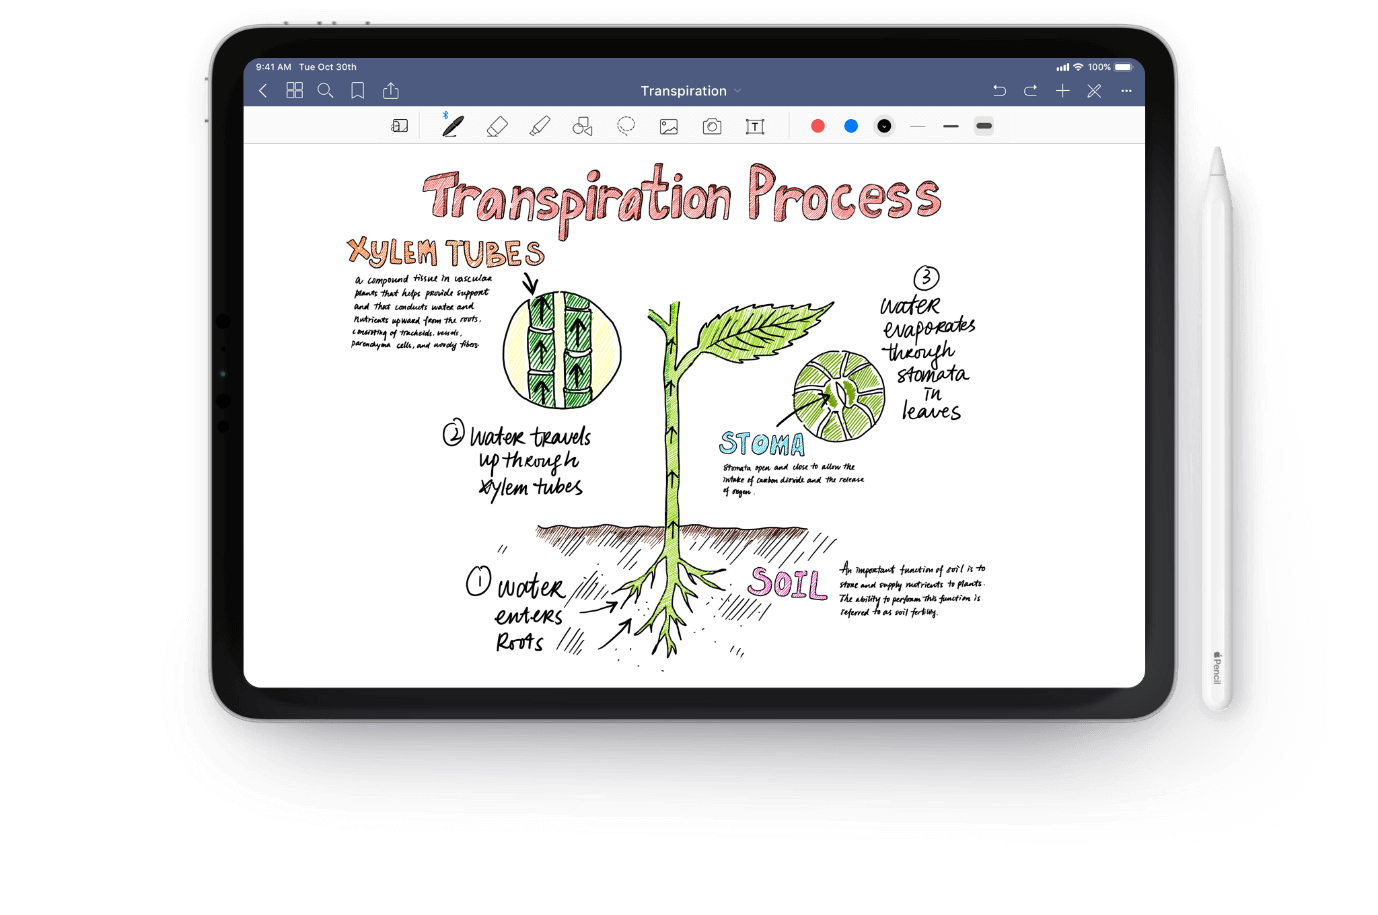 good note taking apps for ipad with apple pencil